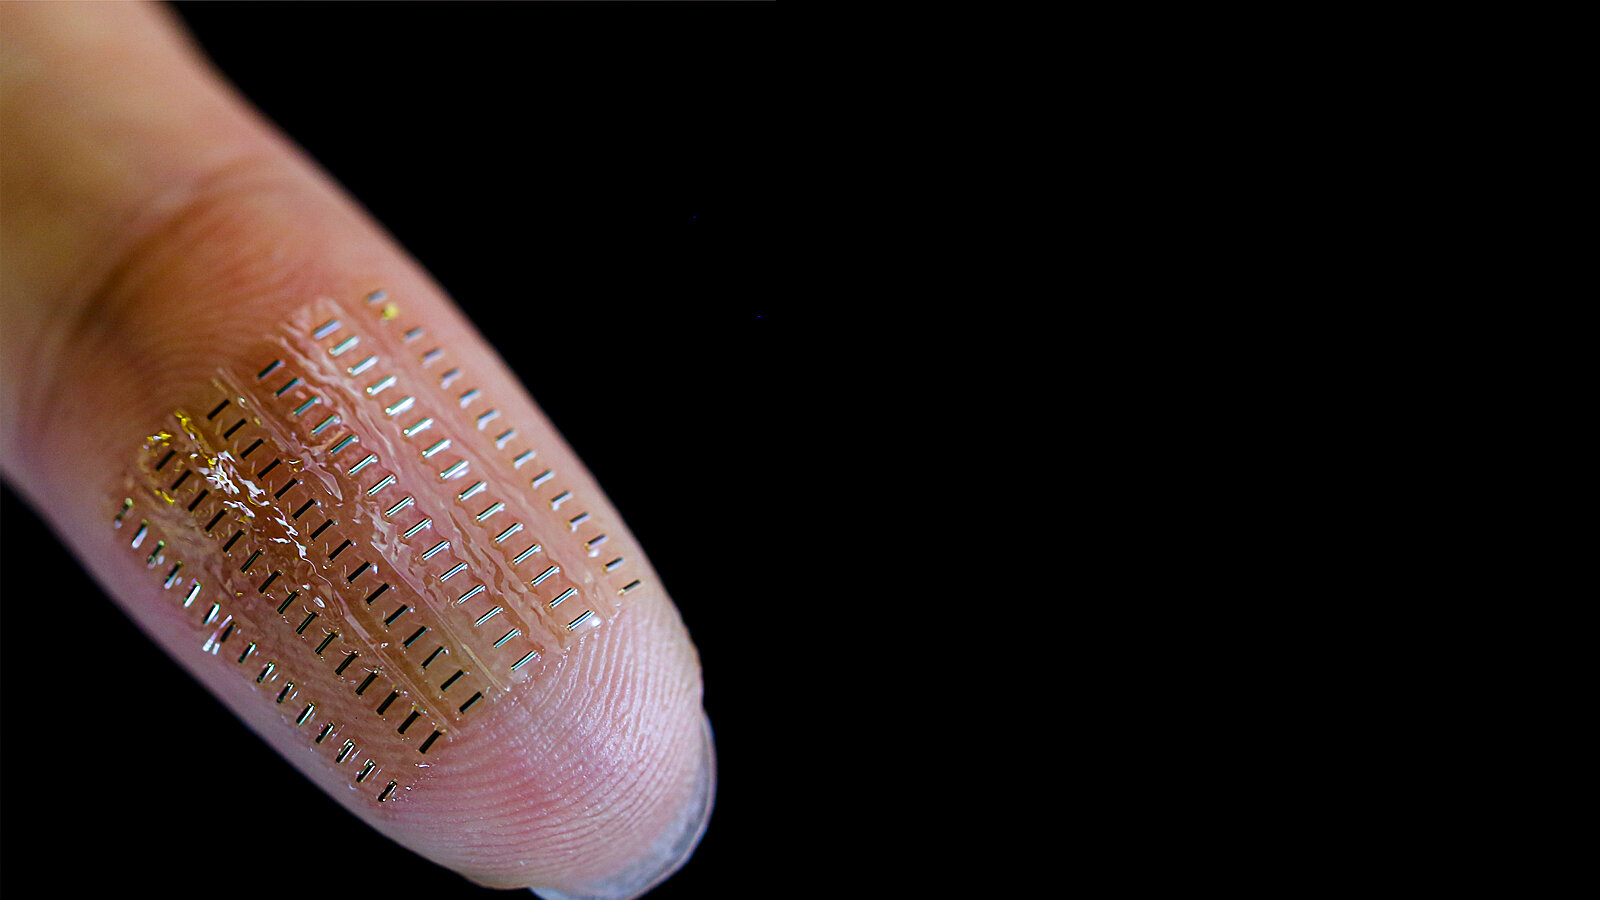  A microelectronic device attached on a fingertip.